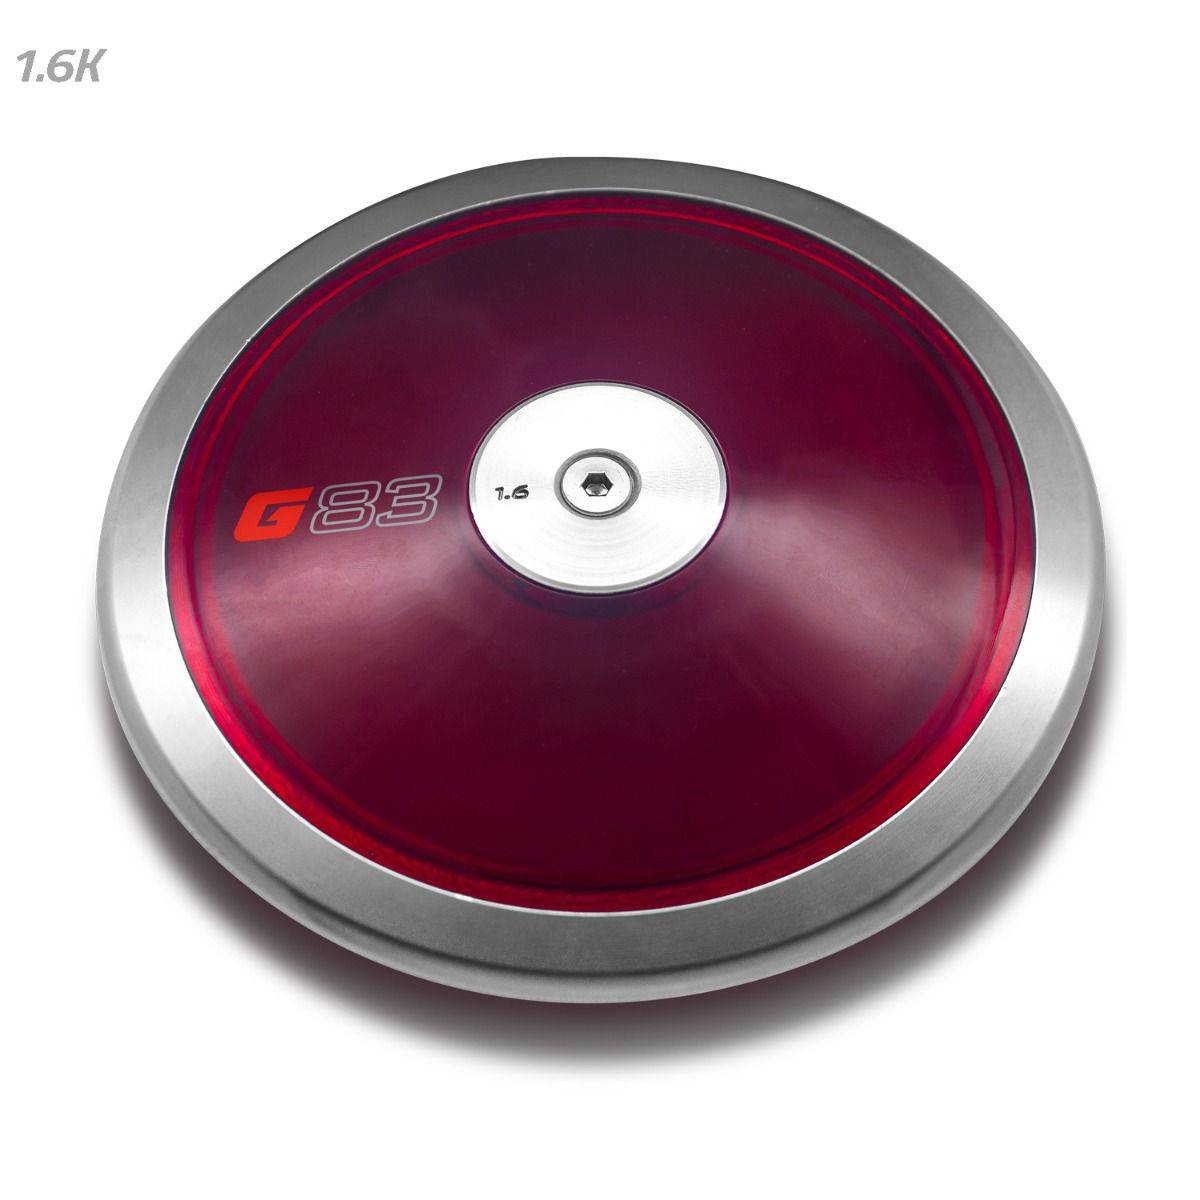 Gill Athletics 1.6K G83 Red Discus